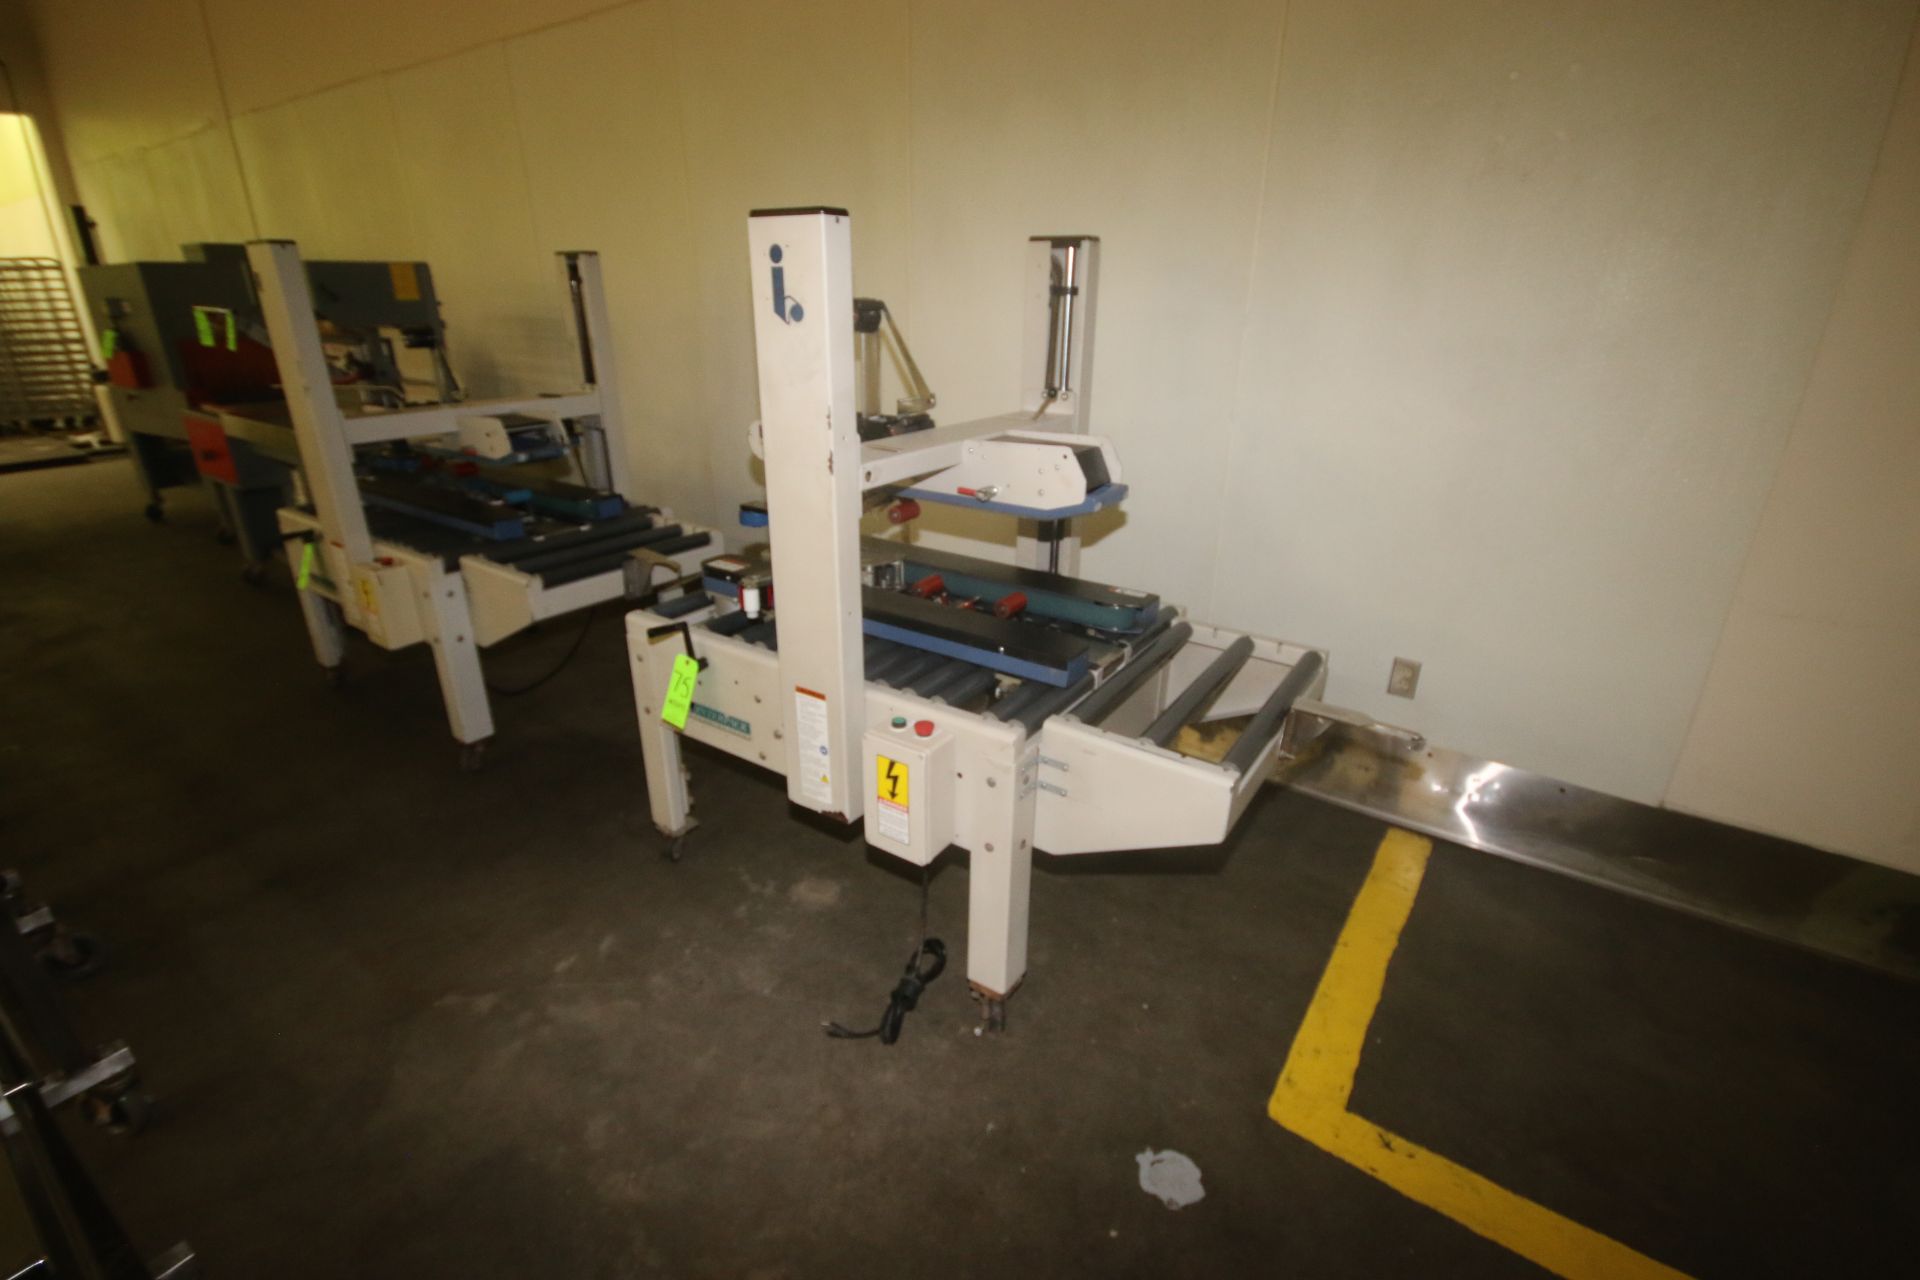 InterPack Top & Bottom Case Sealer, M/N USA 2024-SB/3, 115 Volts, 1 Phase, with Top & Bottom Tape - Image 2 of 5